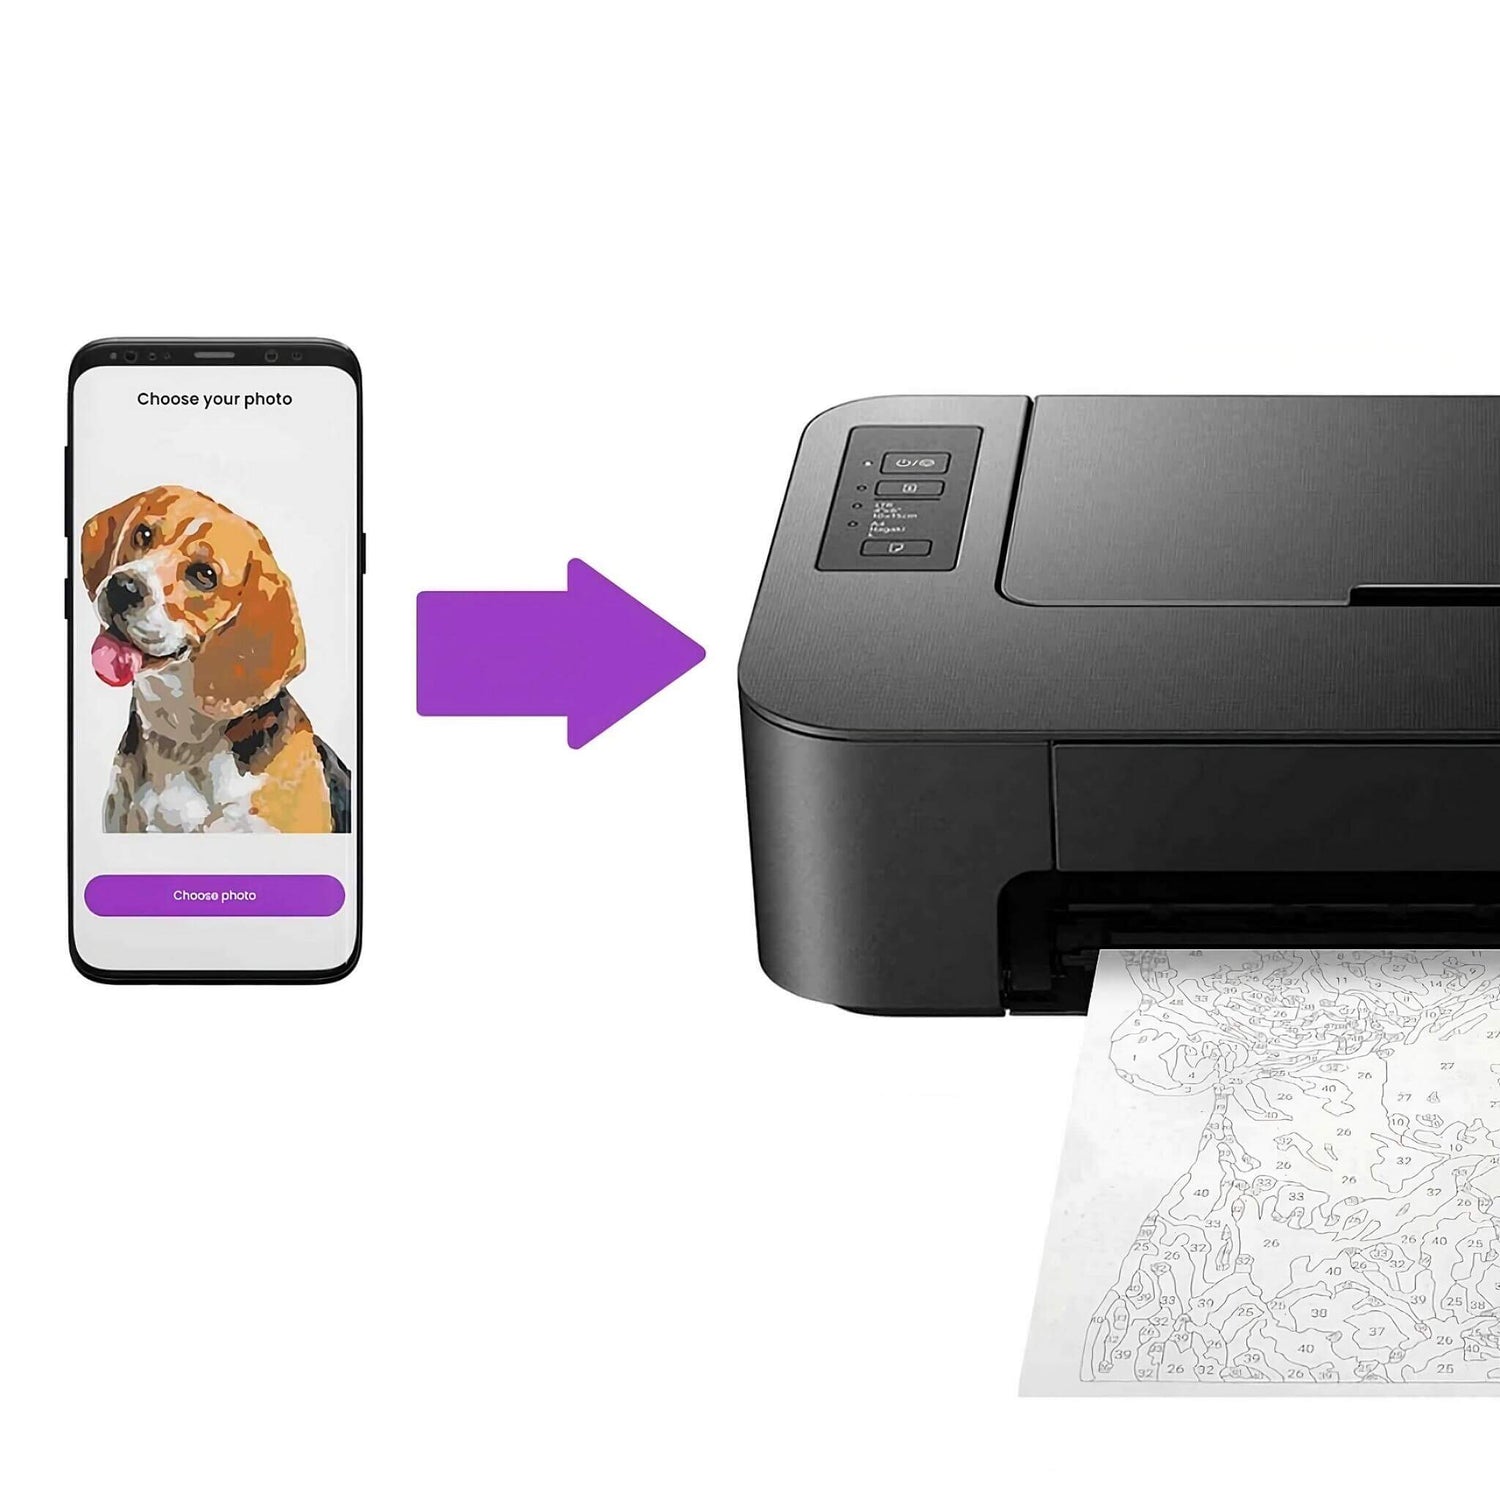 A smartphone displaying a custom paint by number preview of a dog with a 'Choose photo' button, pointing with a purple arrow towards a printer which is printing out a custom paint by number design of the dog.